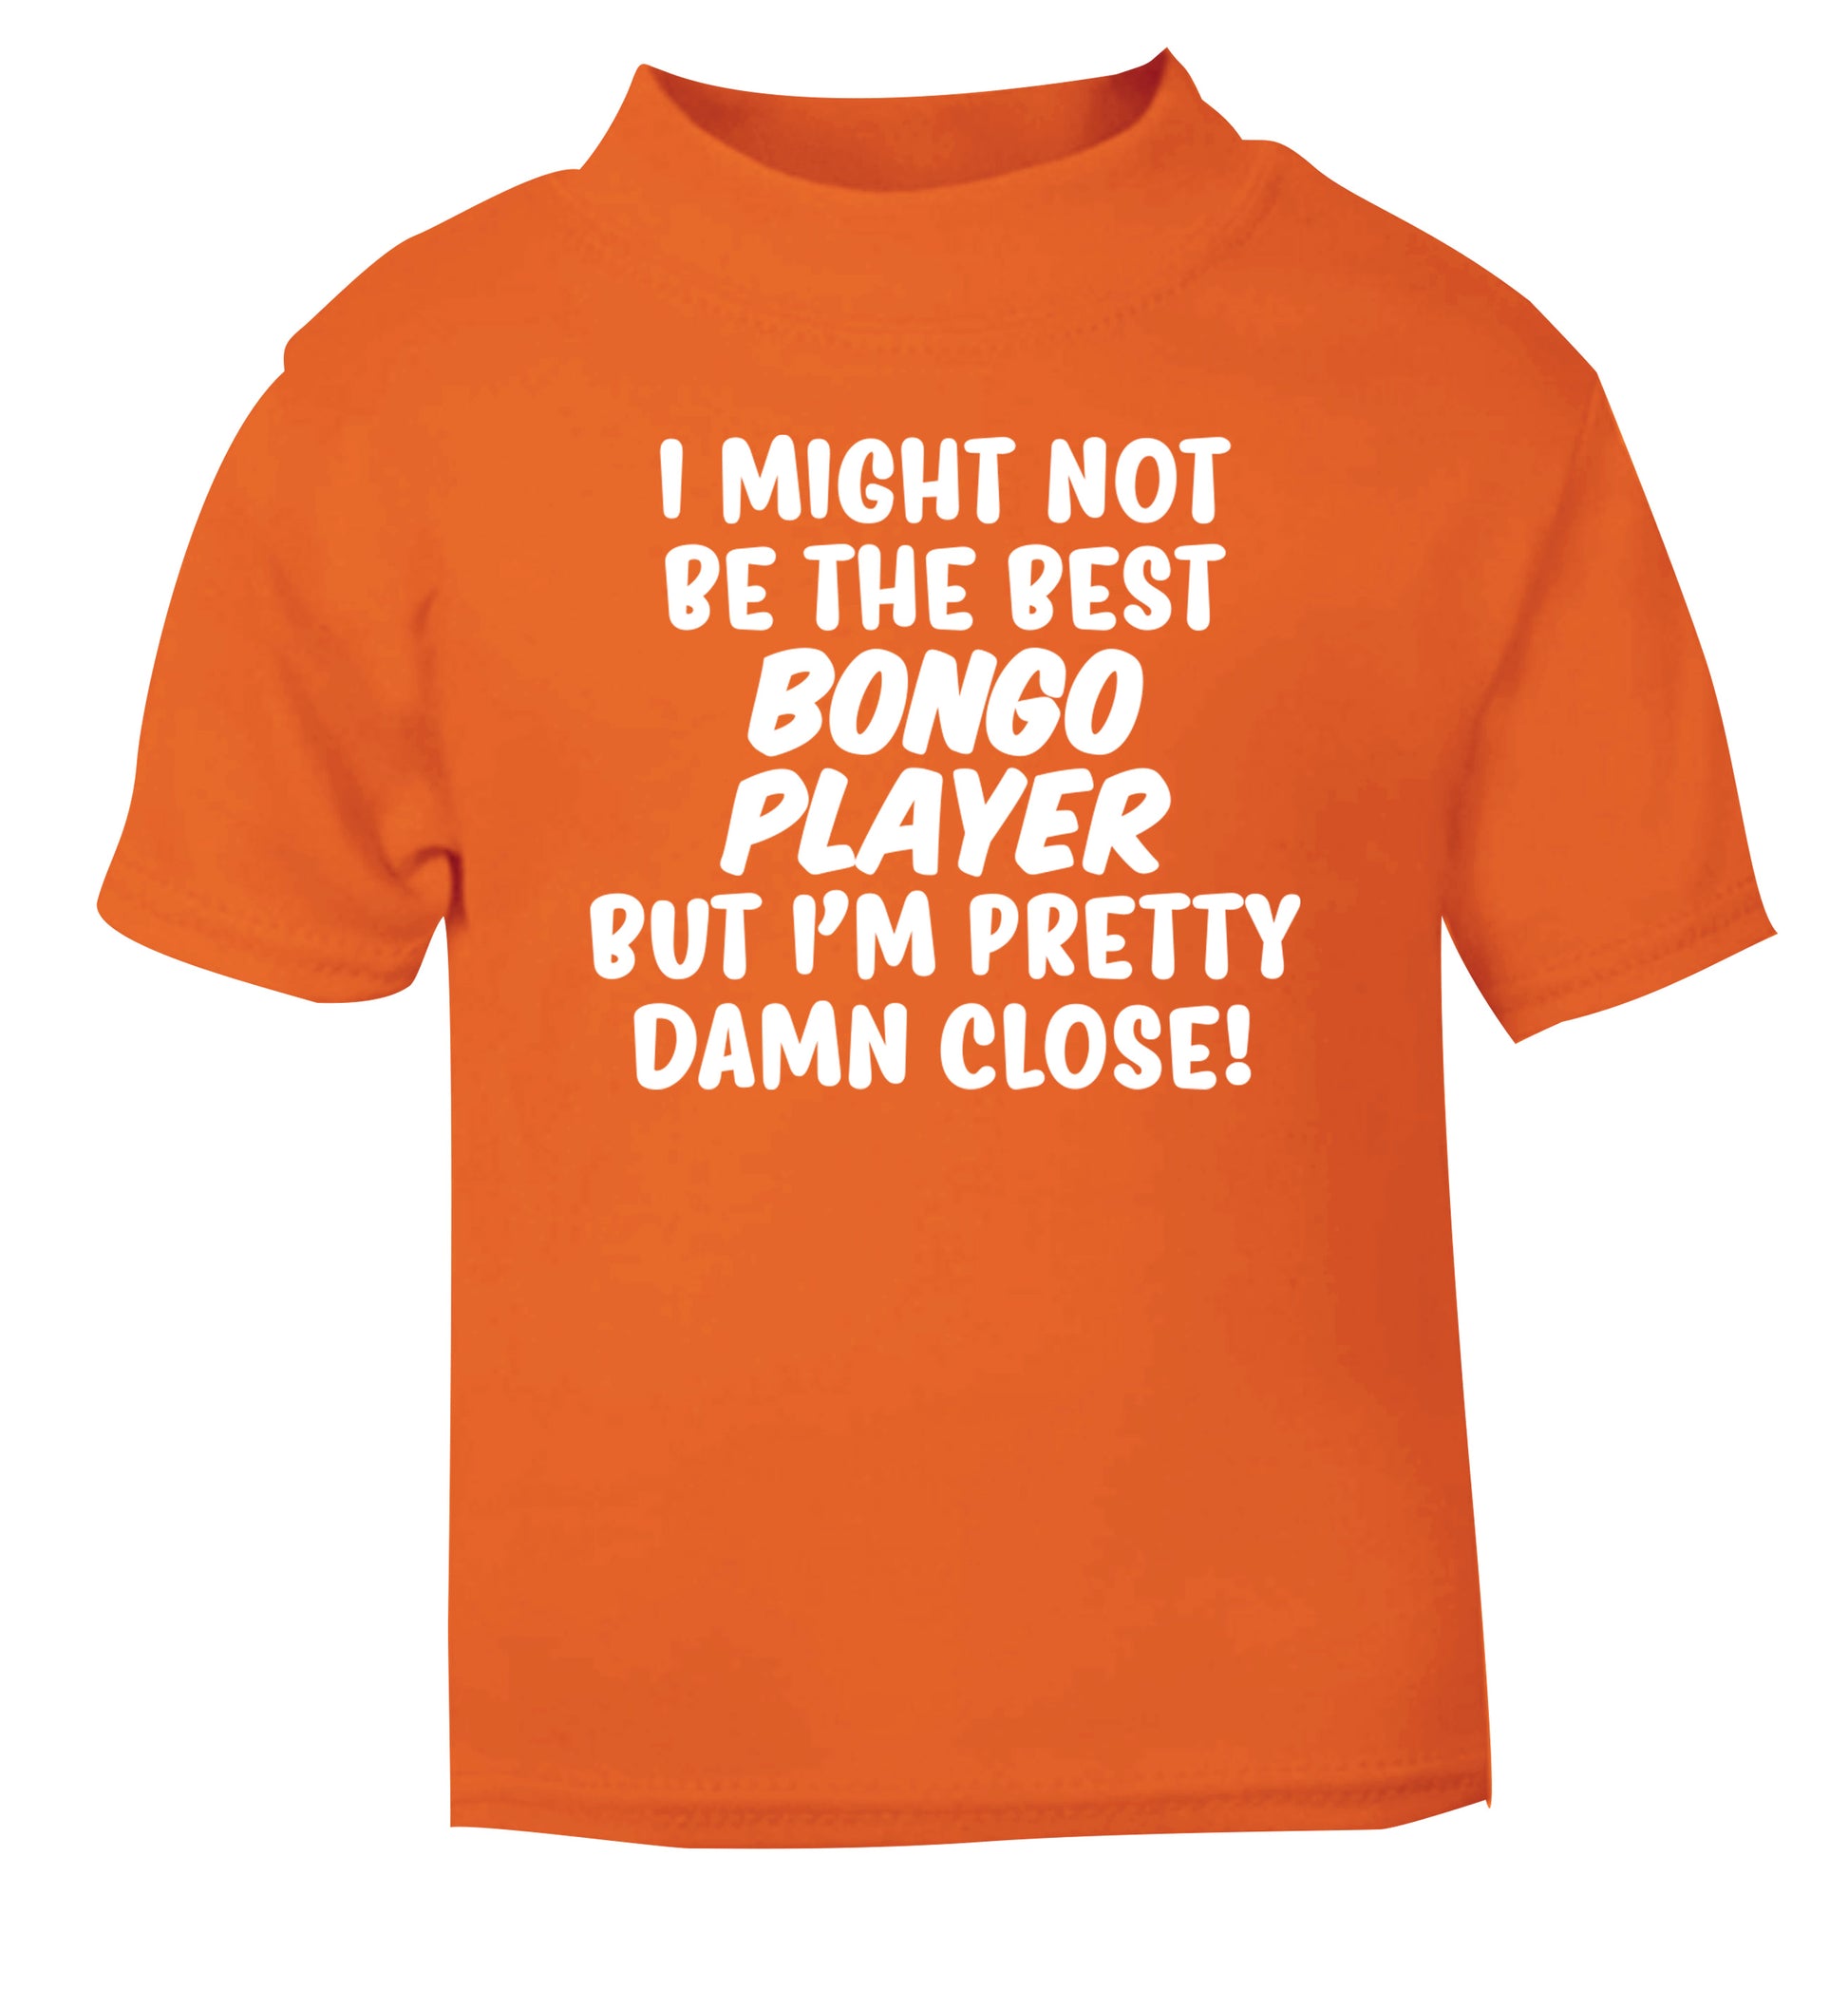 I might not be the best bongo player but I'm pretty close! orange Baby Toddler Tshirt 2 Years